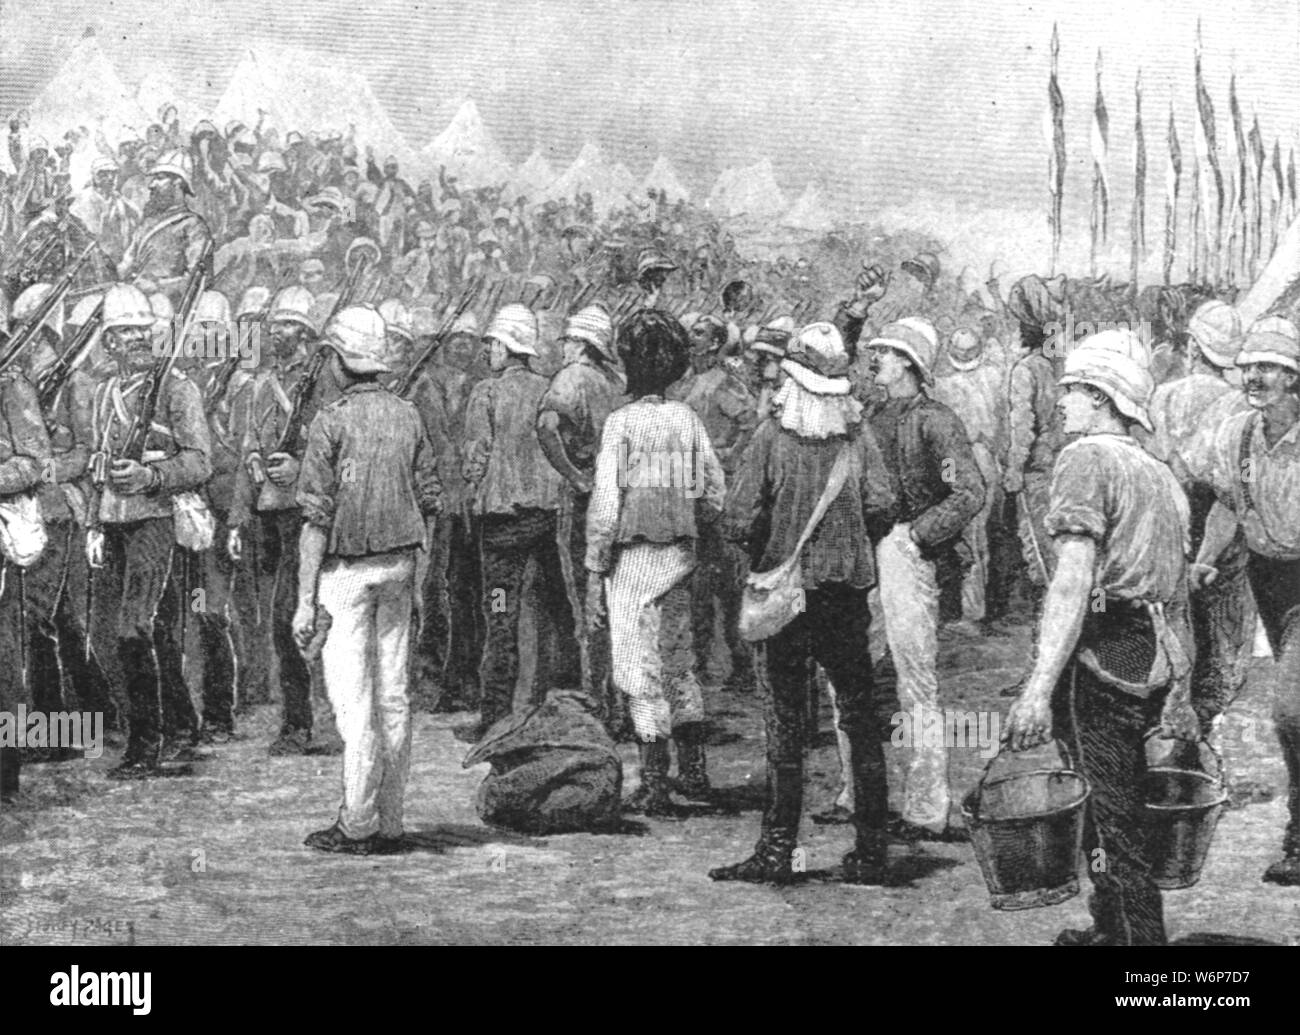 'Colonial Troops in the Soudan War, 1883-85: New South Wales Infantry Marching into Camp at Suakim, March 29, 1885', (1901). The Mahdist War (1881-1899) was fought between British forces and the Mahdist Sudanese army in the Sudan, east Africa. From &quot;The Illustrated London News Record of the Glorious Reign of Queen Victoria 1837-1901: The Life and Accession of King Edward VII. and the Life of Queen Alexandra&quot;. [London, 1901] Stock Photo